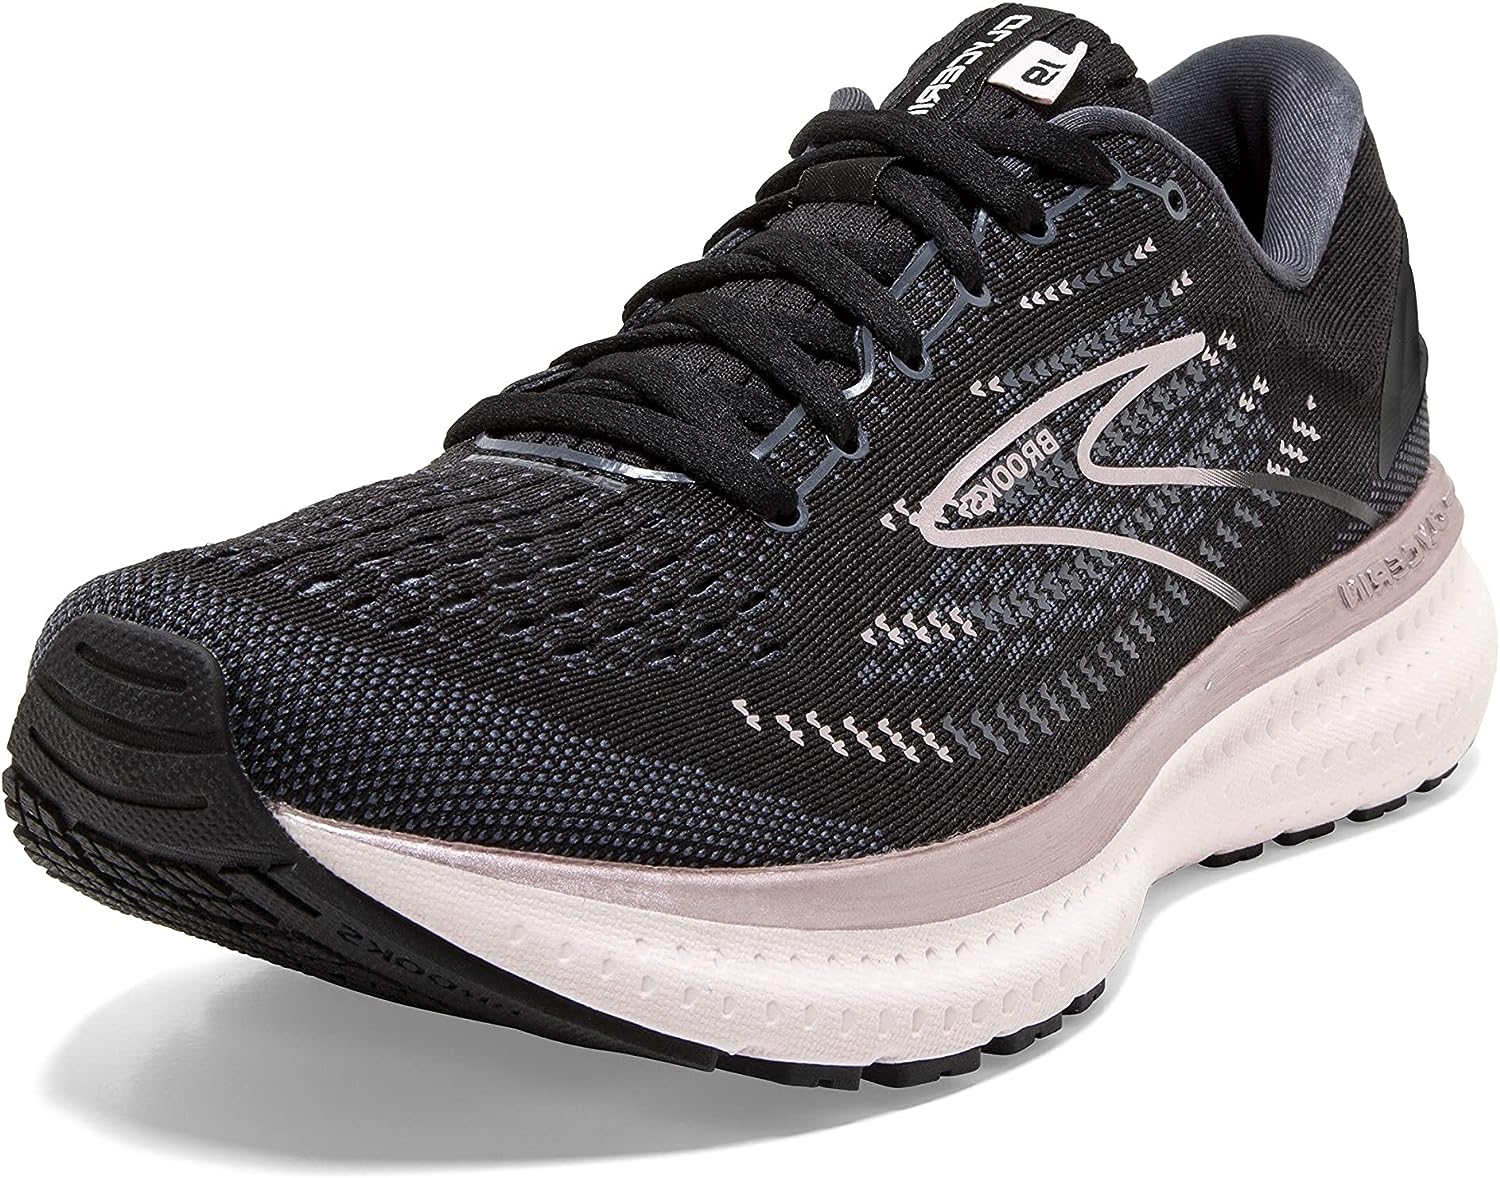 neutral plus running shoes detailed review